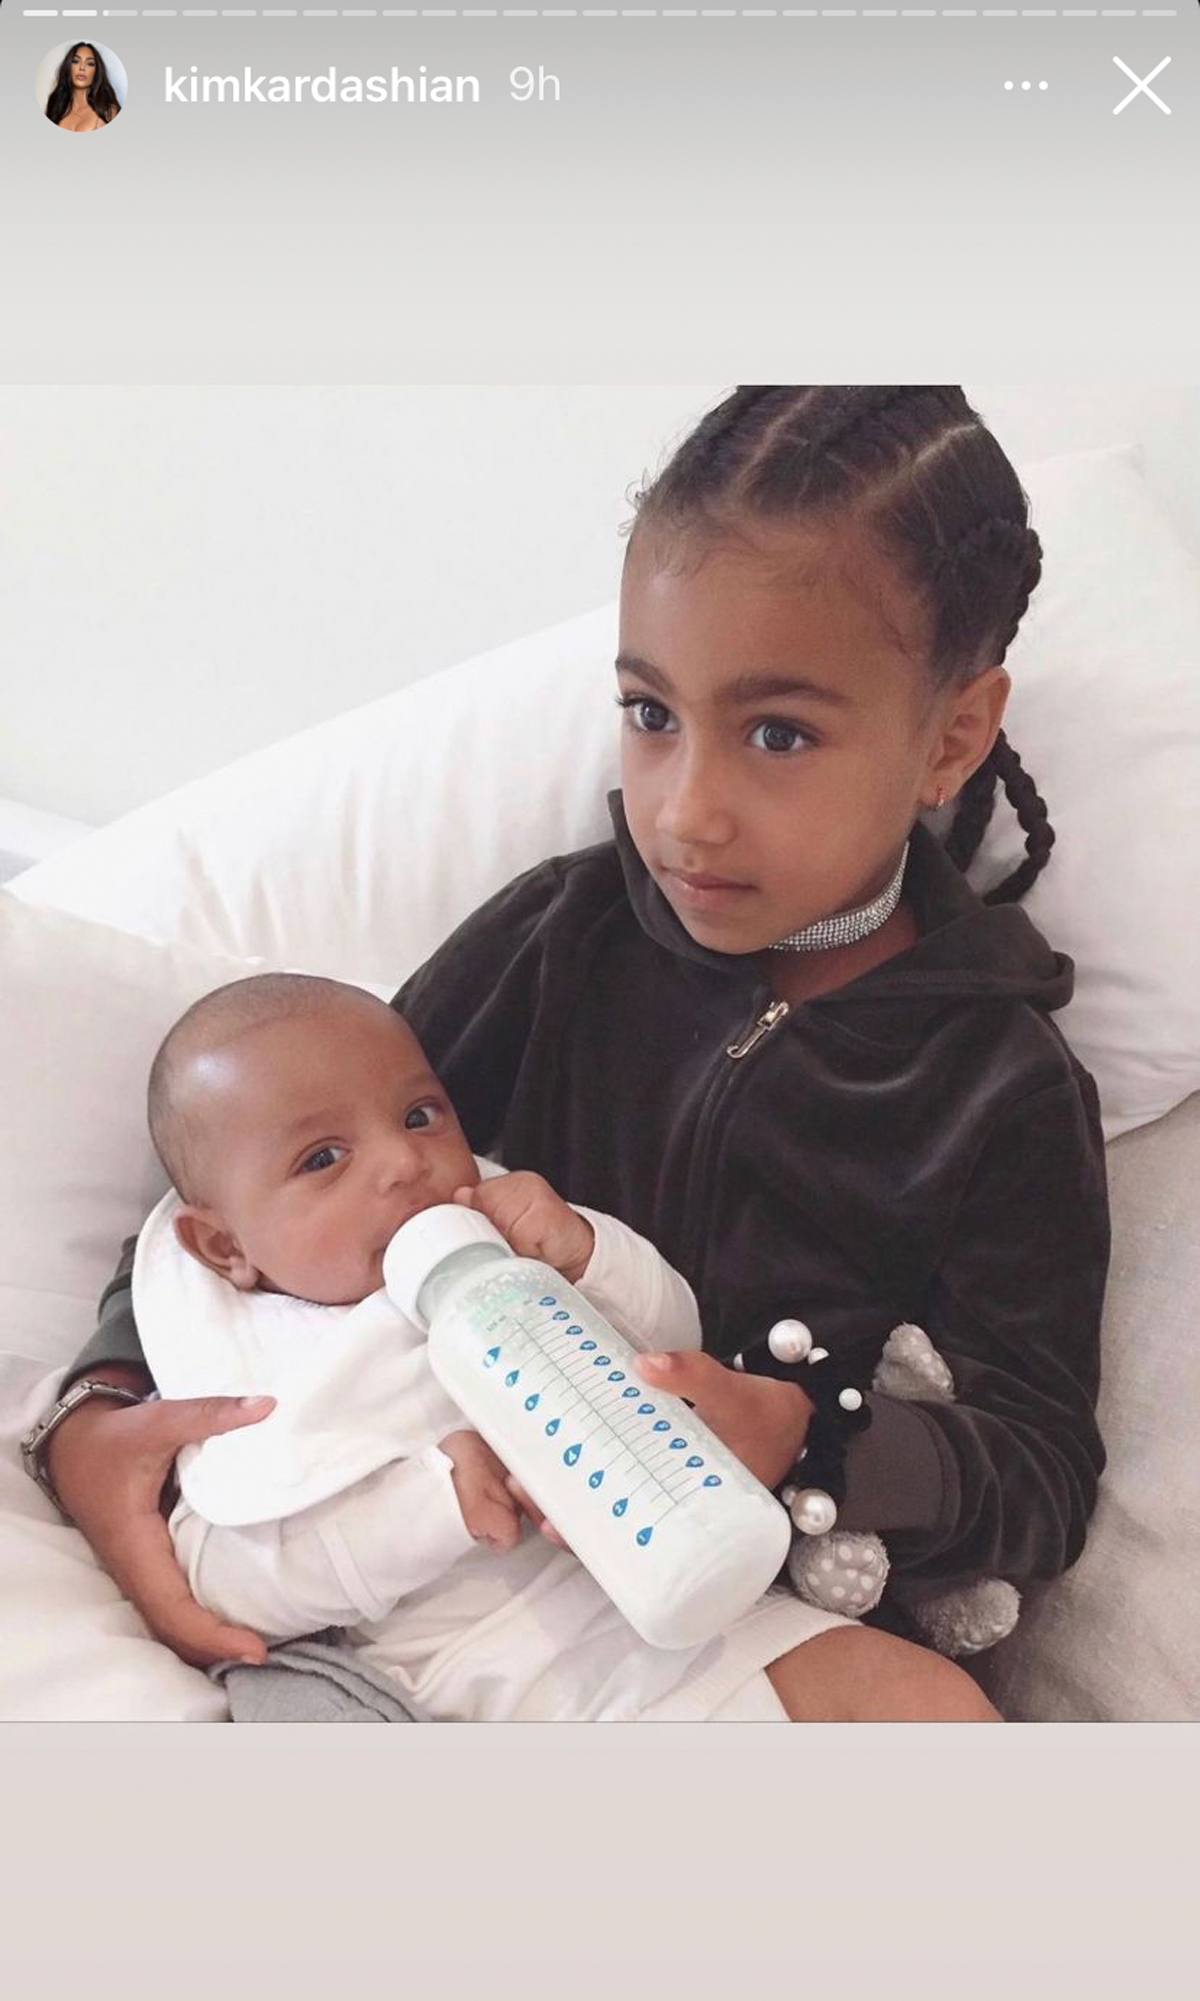 Kim Kardashian Celebrates Son Psalm’s 2nd Birthday With Some Never-Before-Seen Pics! 